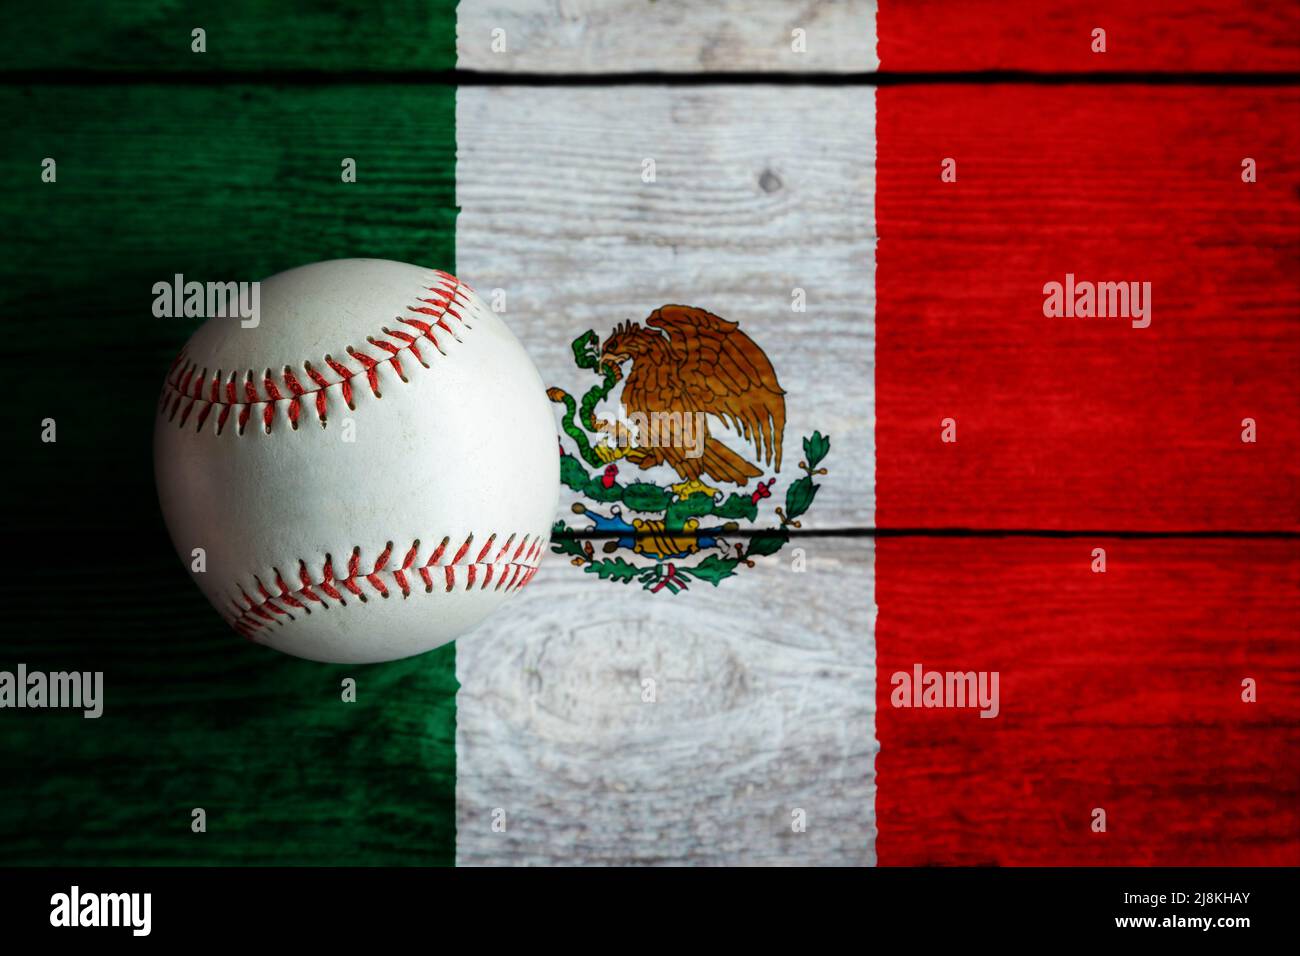 Leather baseball on rustic wooden background painted with Mexican flag with copy space. Mexico is one of the top baseball nations in the world. Stock Photo